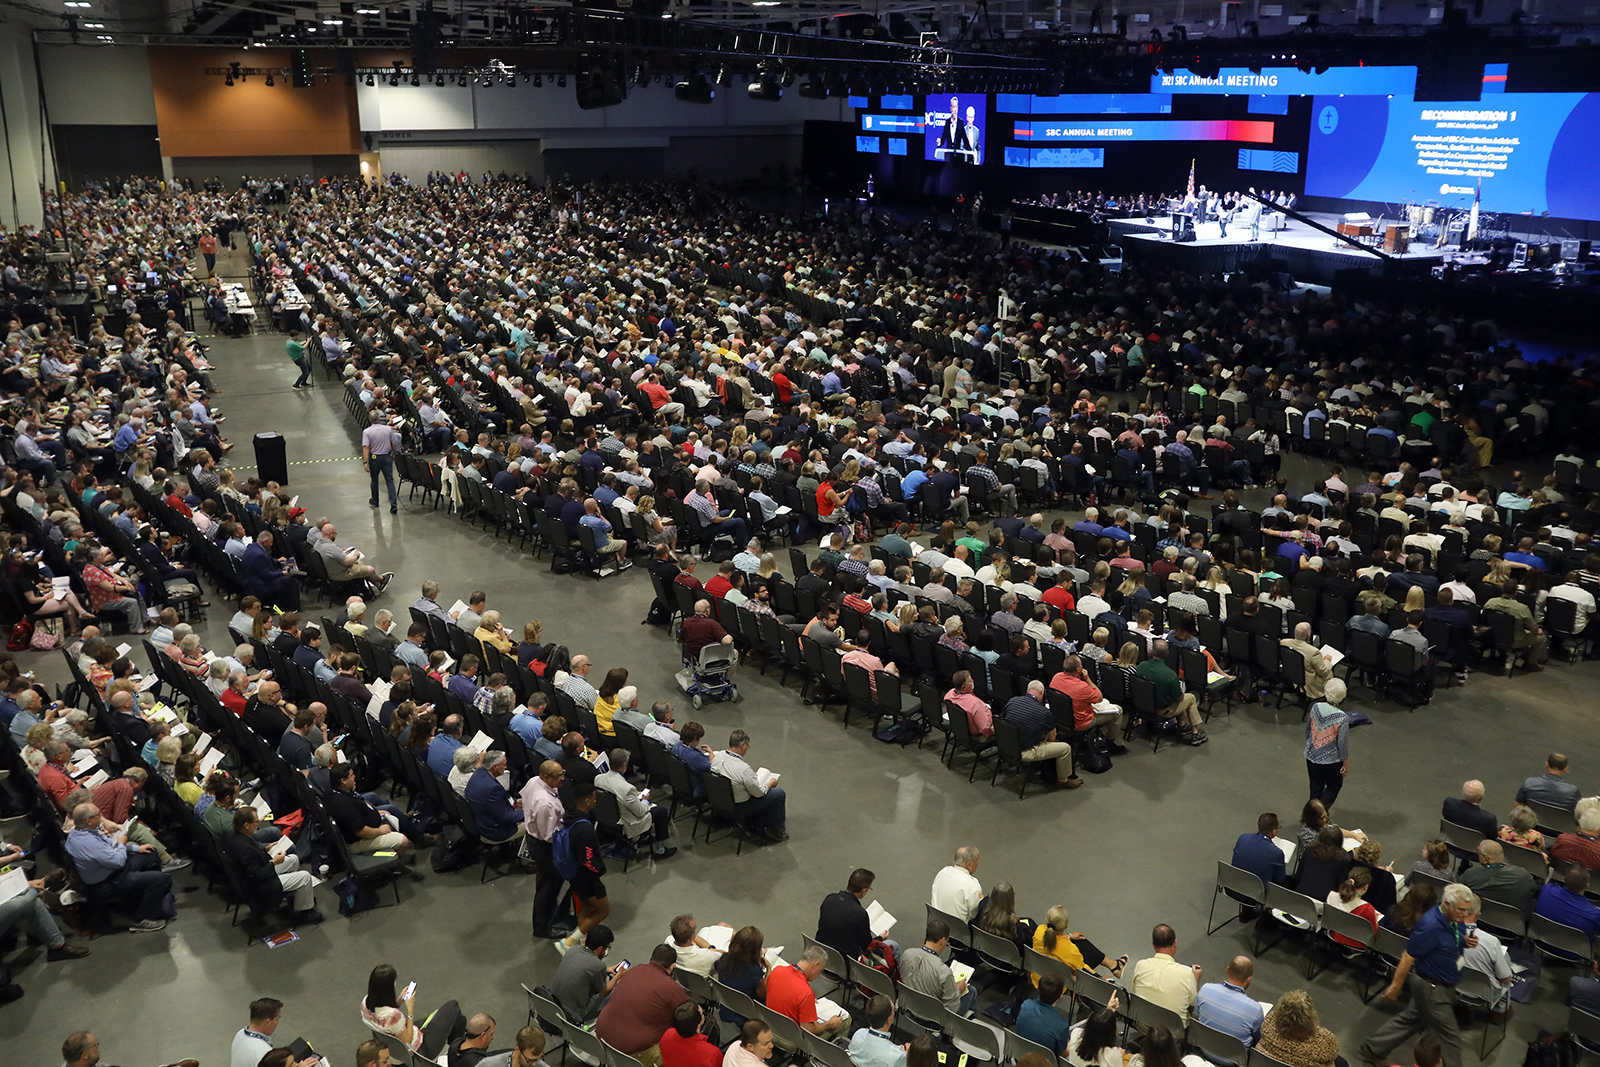 Southern Baptist Convention messengers attend the annual meeting, Tuesday, June 15, 2021, at the Music City Center in Nashville. RNS photo by Kit Doyle